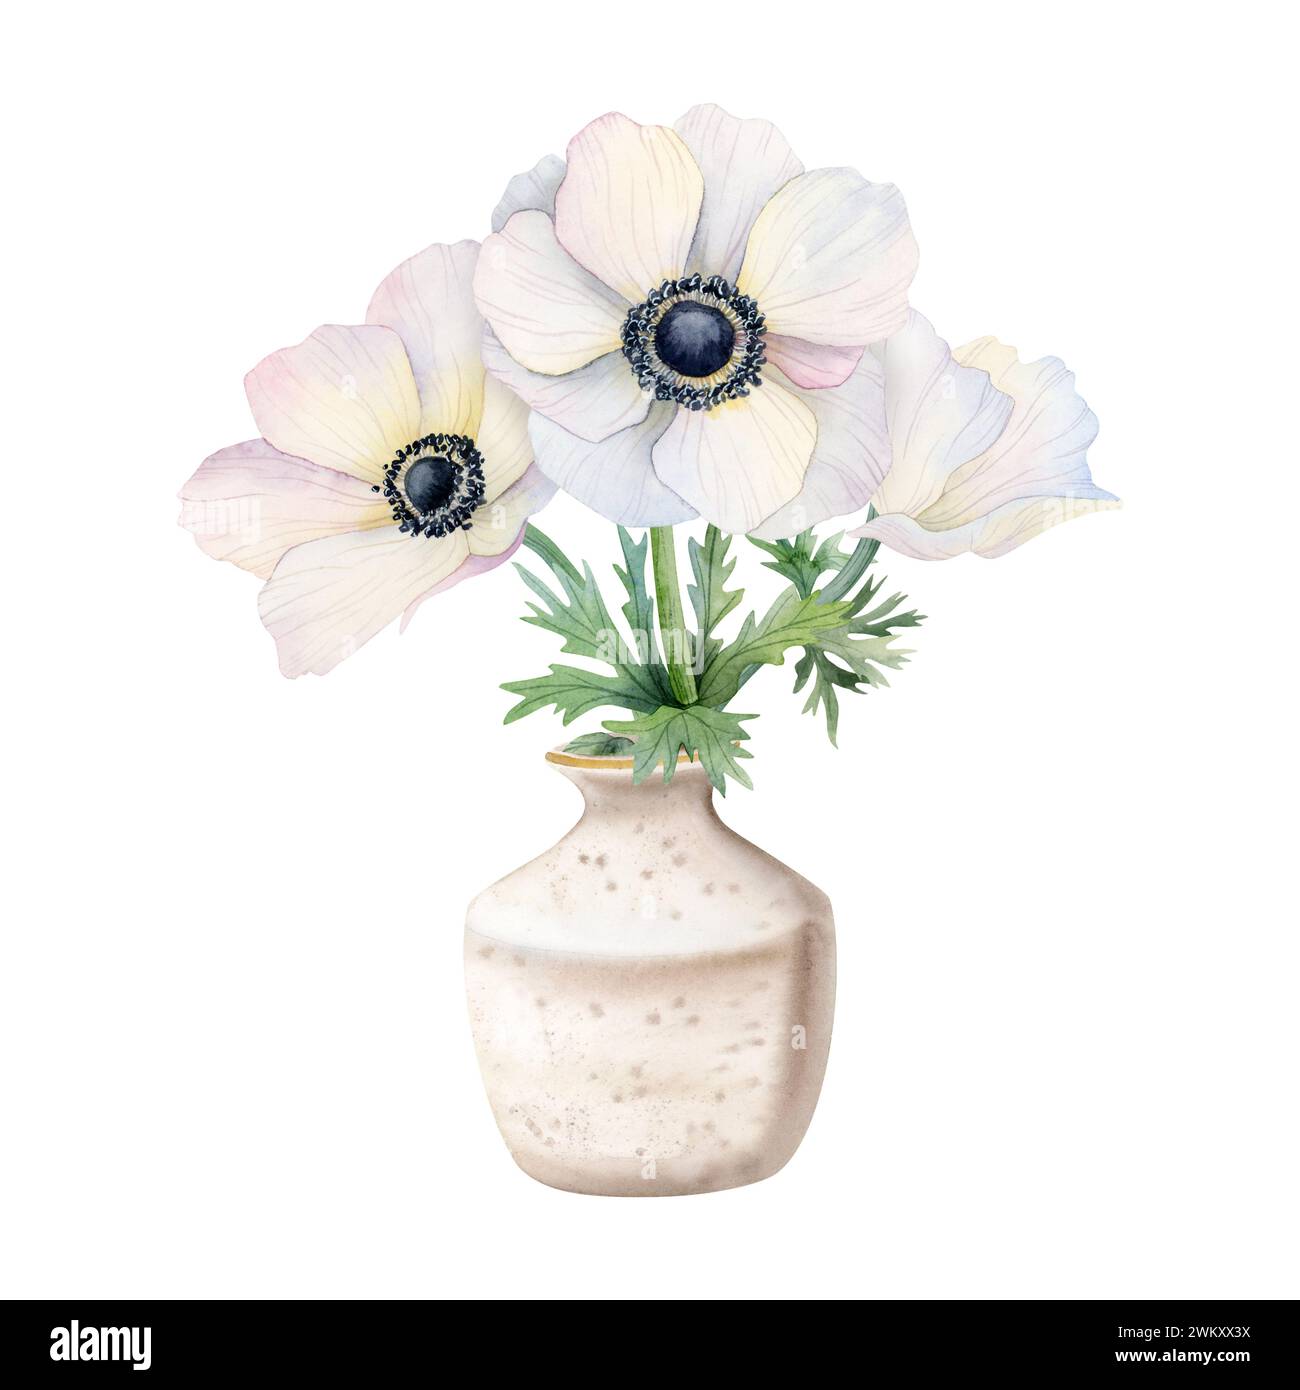 White anemones wildflowers bouquet in ceramic beige vase watercolor illustration isolated on white for floral designs Stock Photo